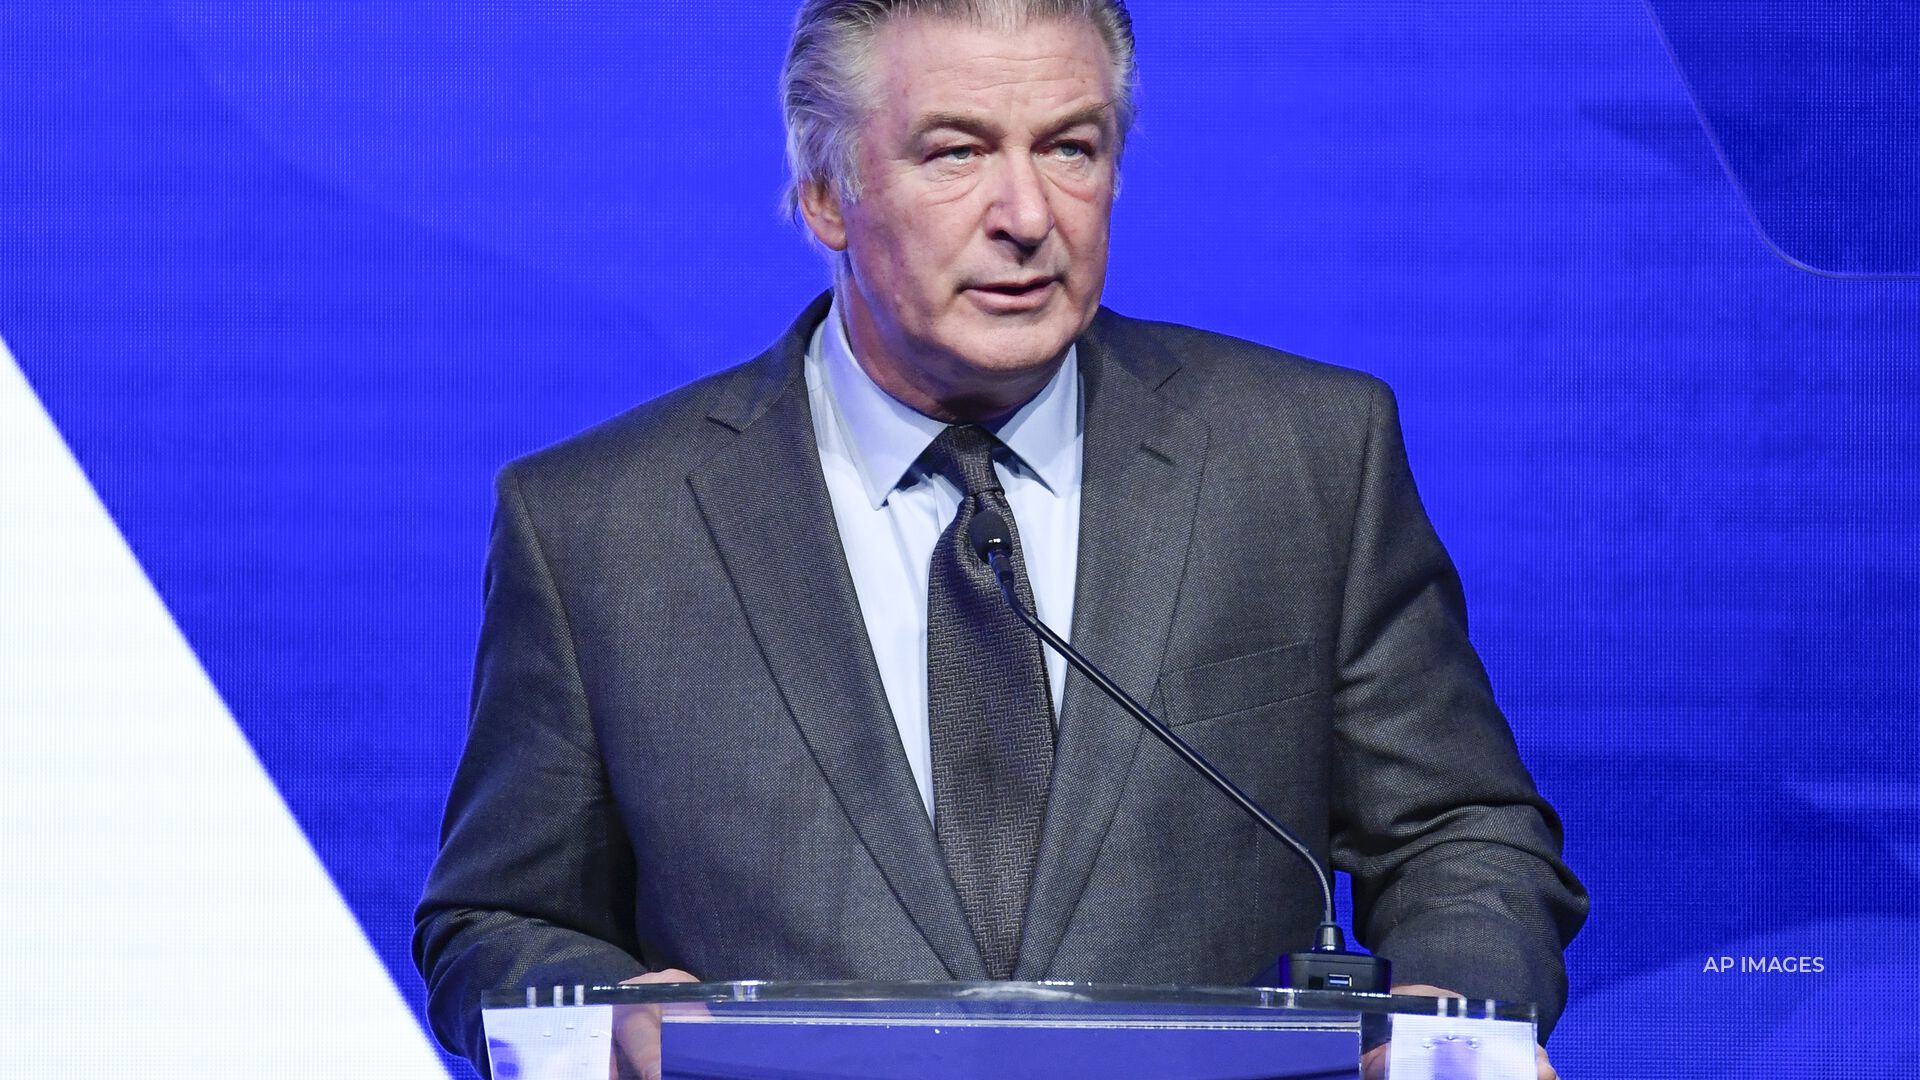 Amid a prop gun safety issues investigation, a search warrant was issued for Alec Baldwin's phone.